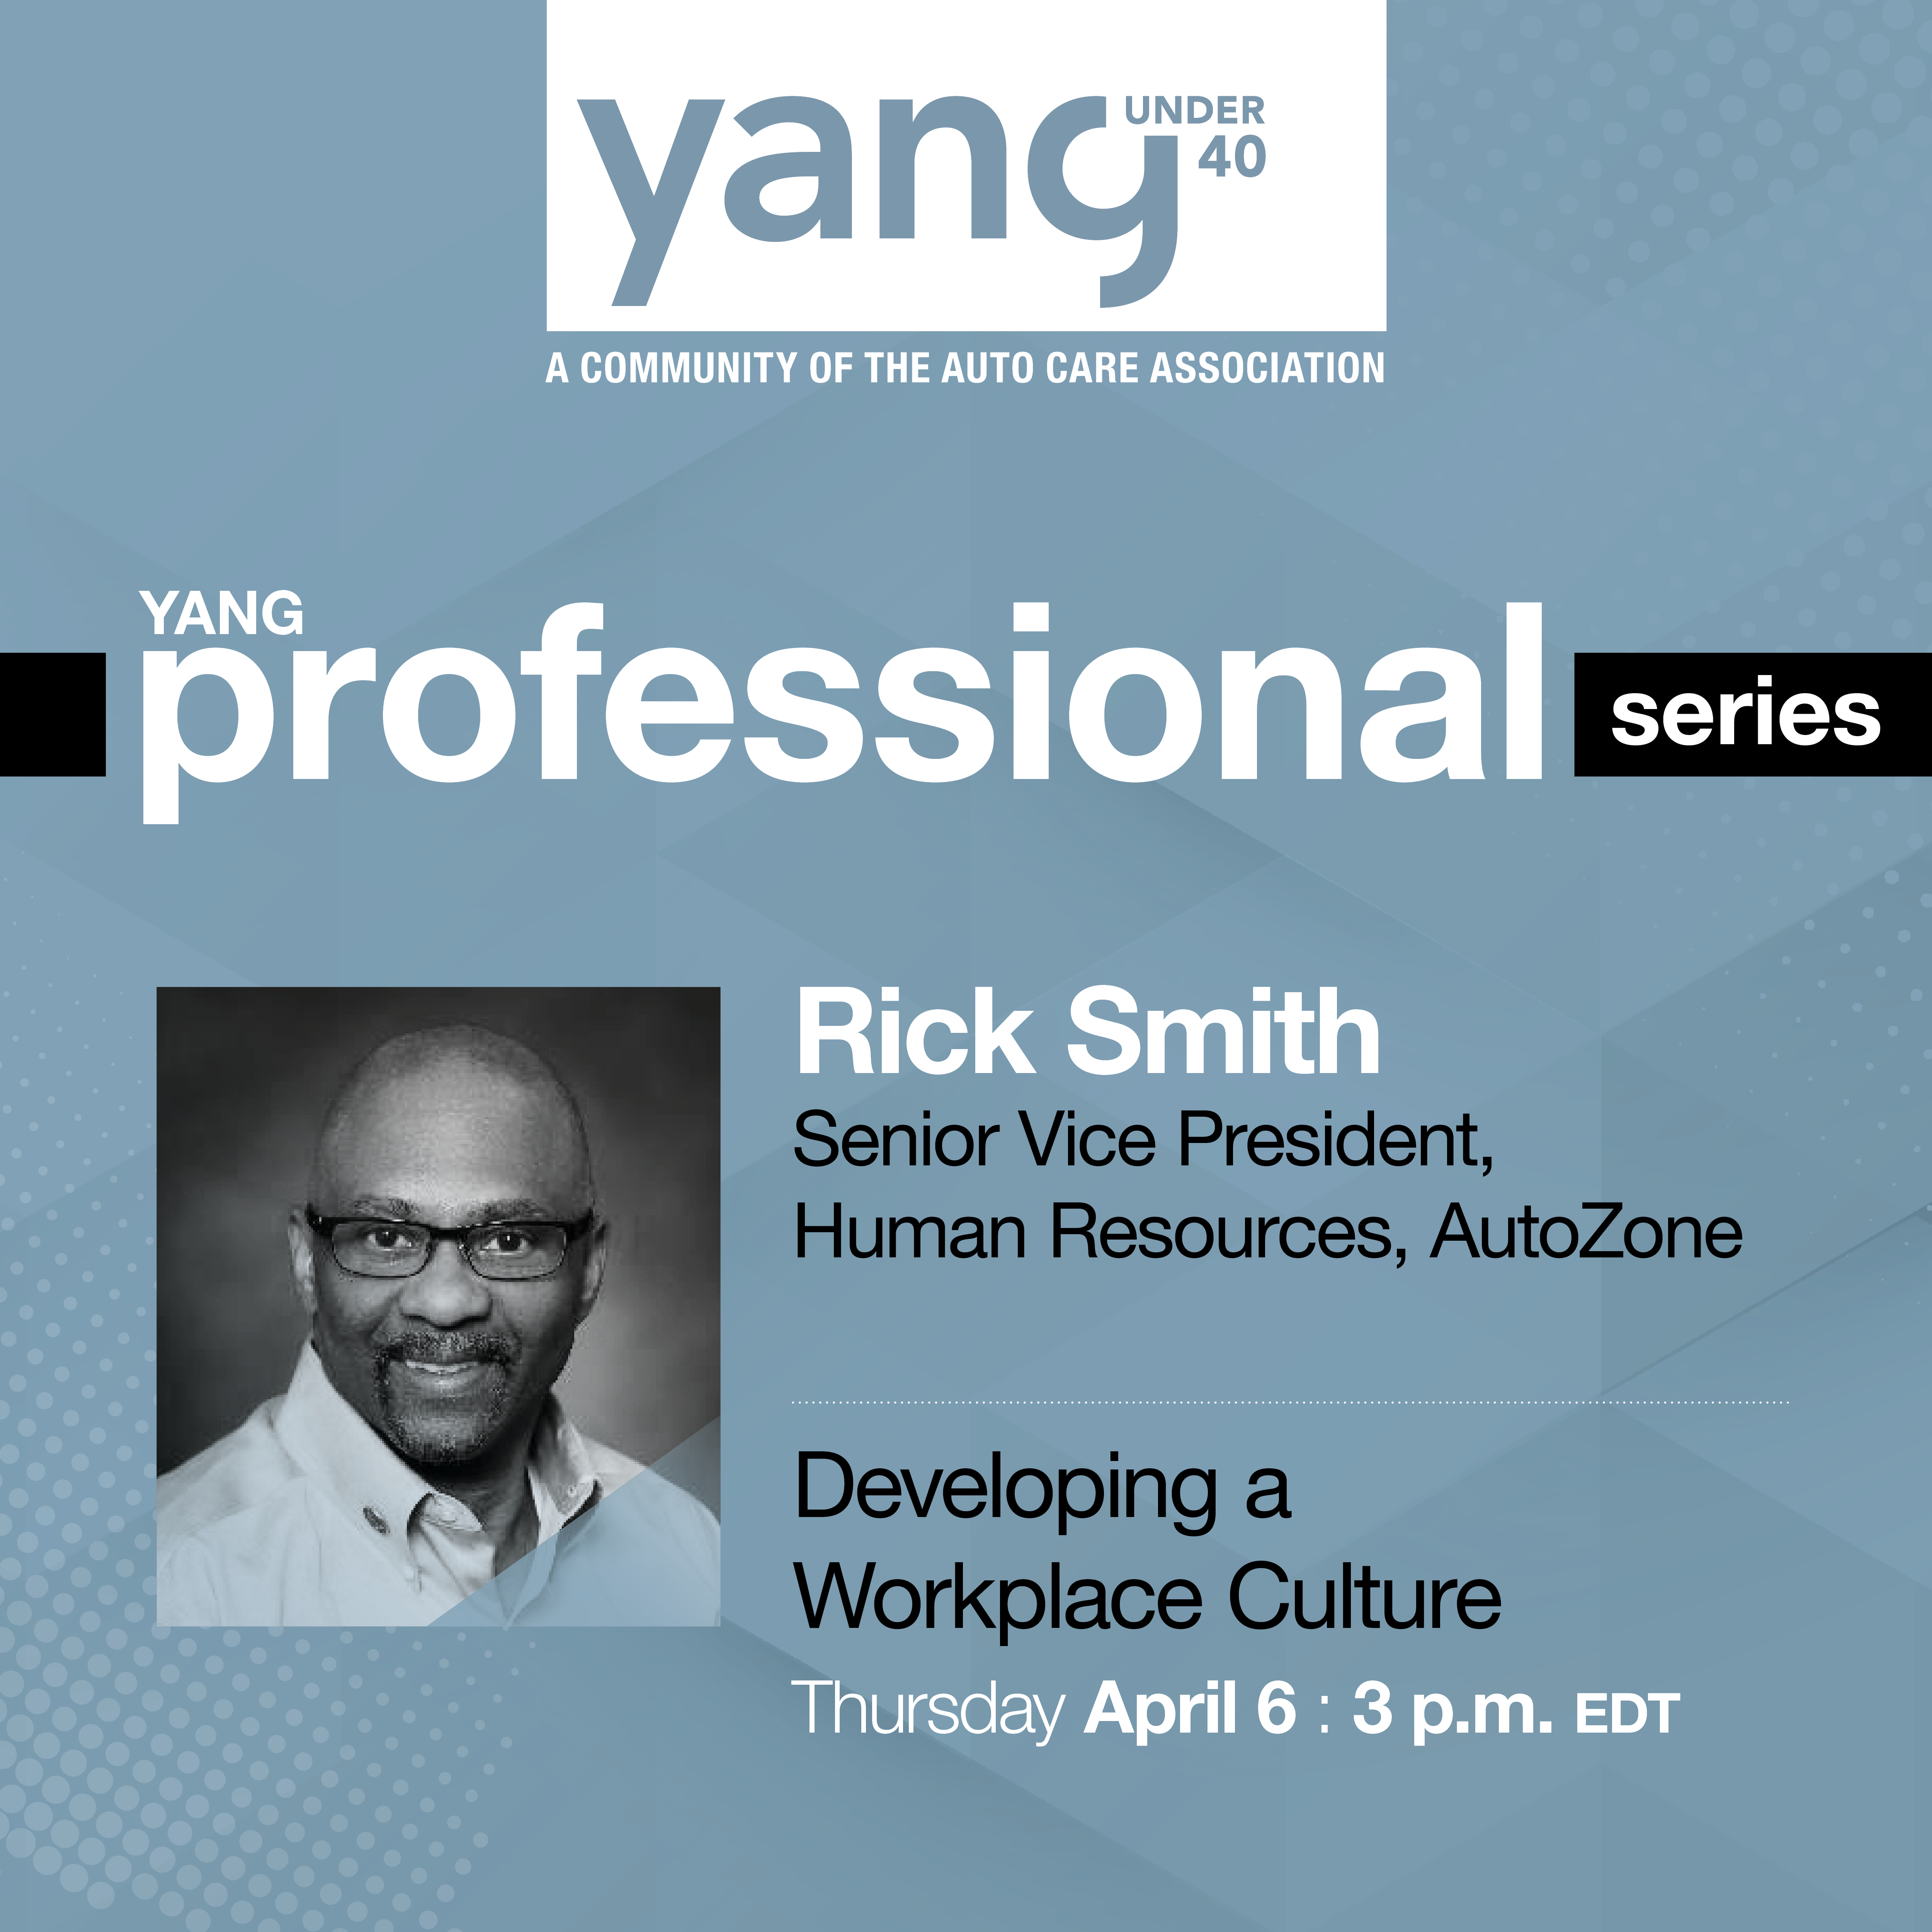 YANG Professional Series featuring Rick Smith